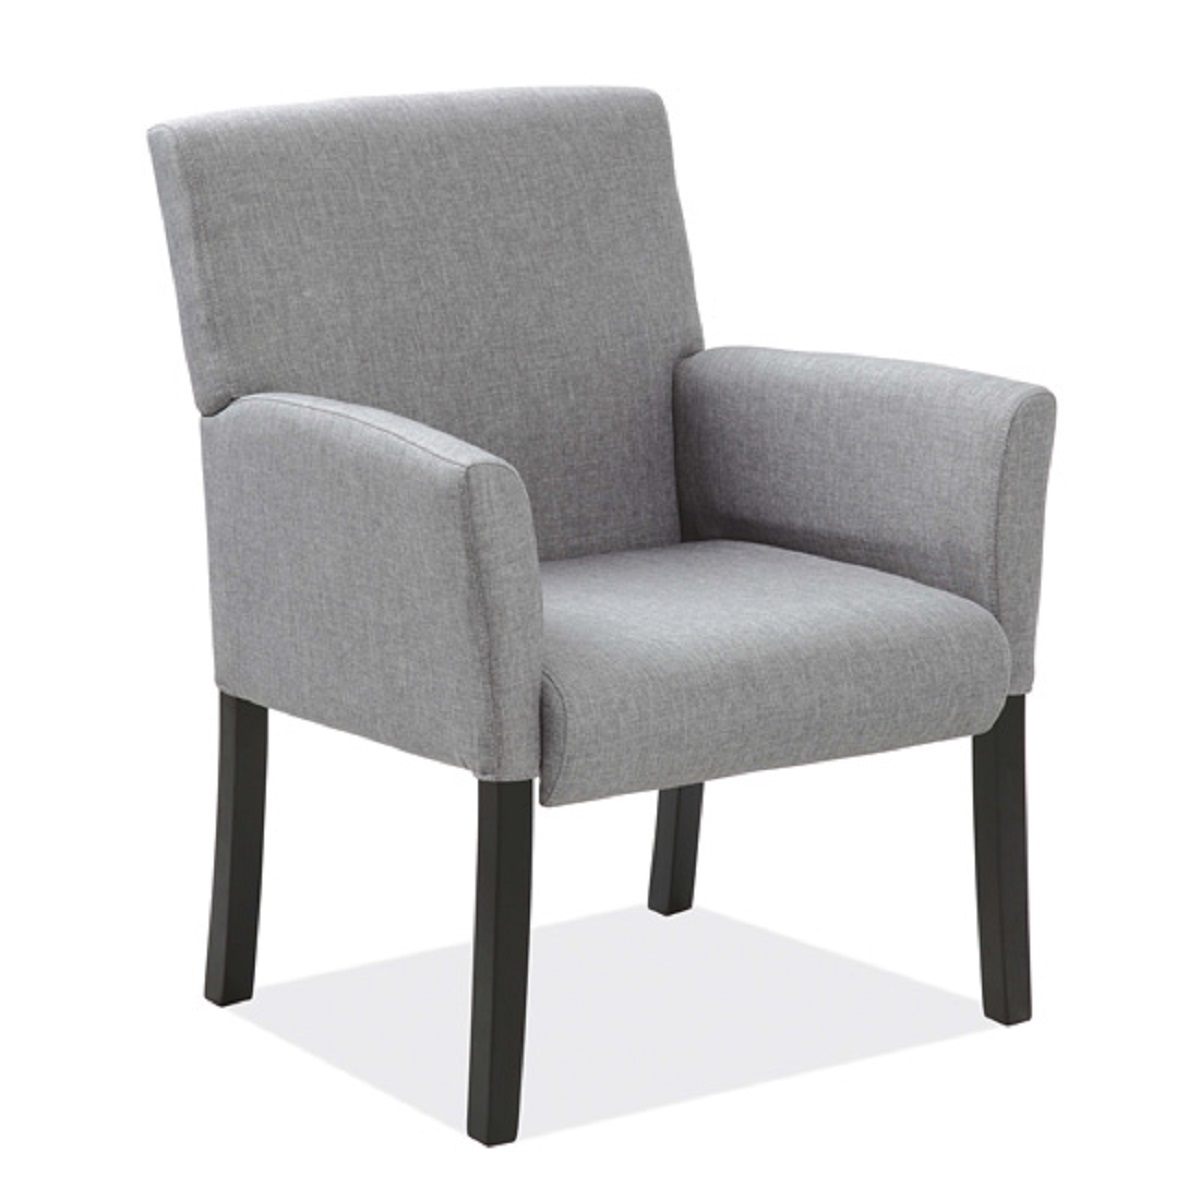 NEW Office Source Guest Chair | Office Furniture Warehouse